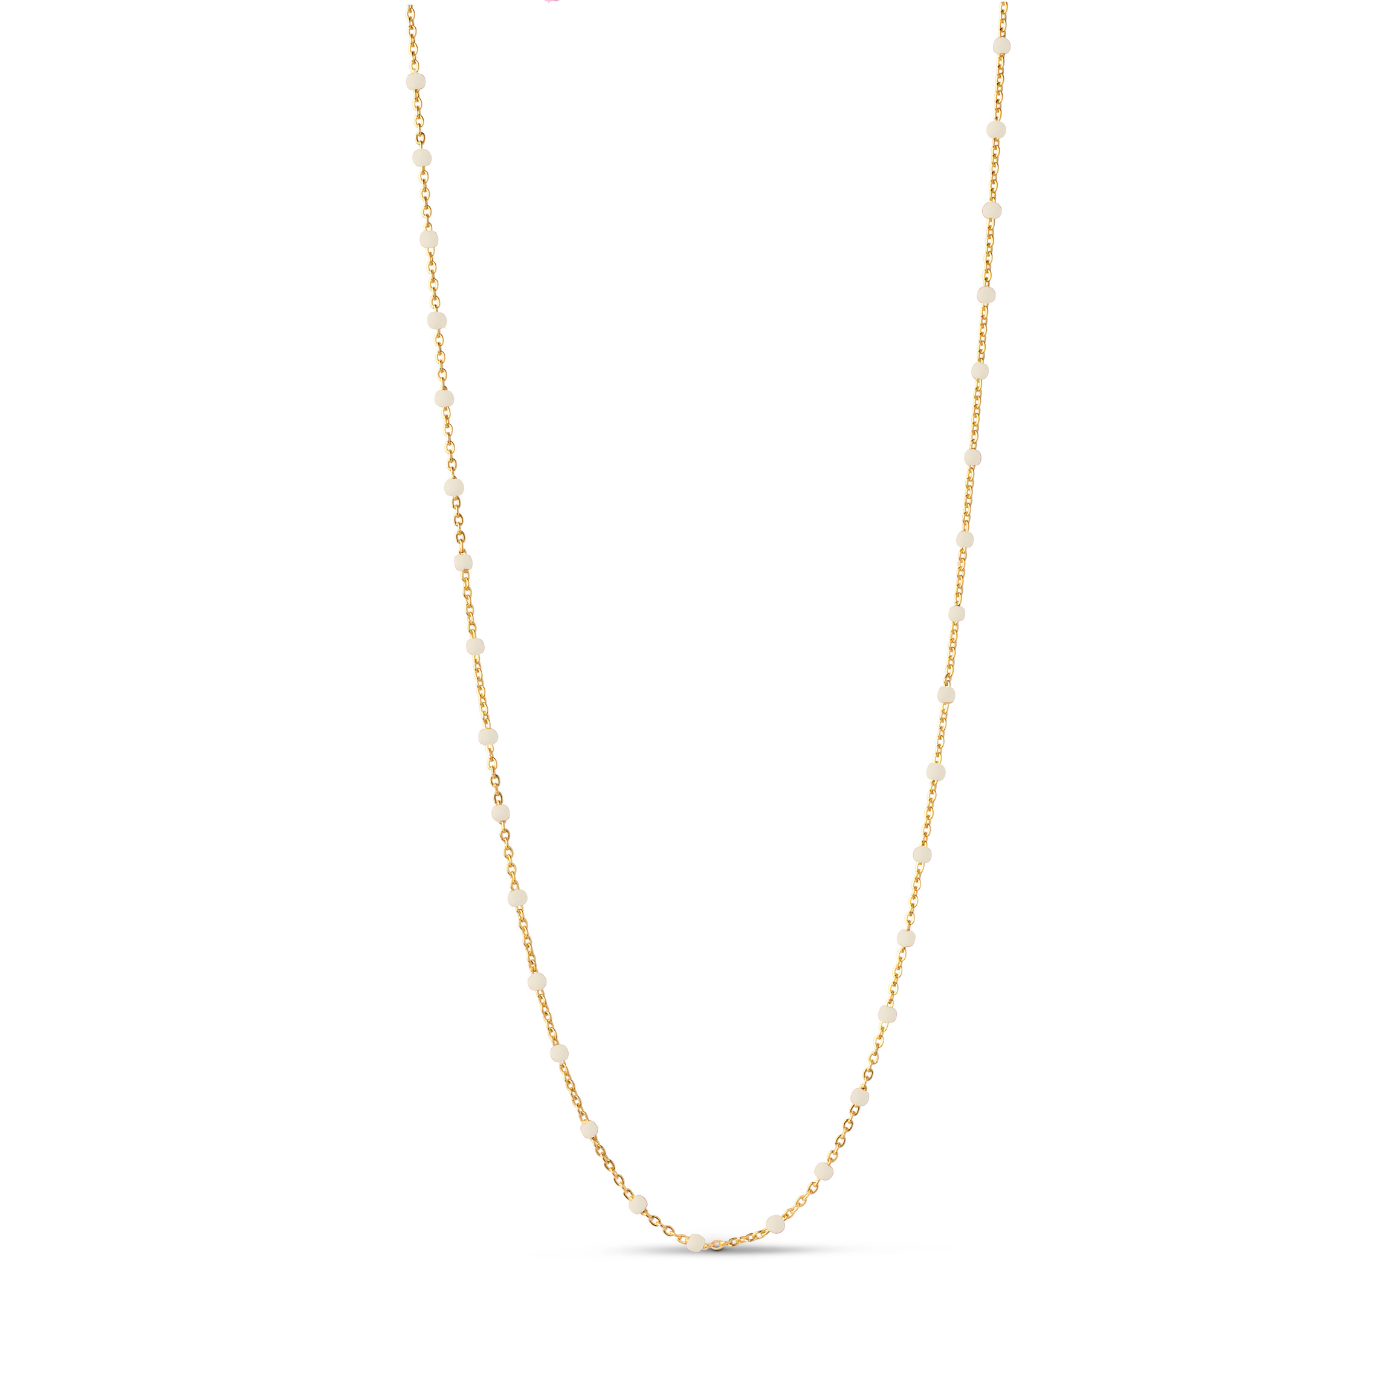 Lola 'Daisy' 18K Gold-plated Necklace